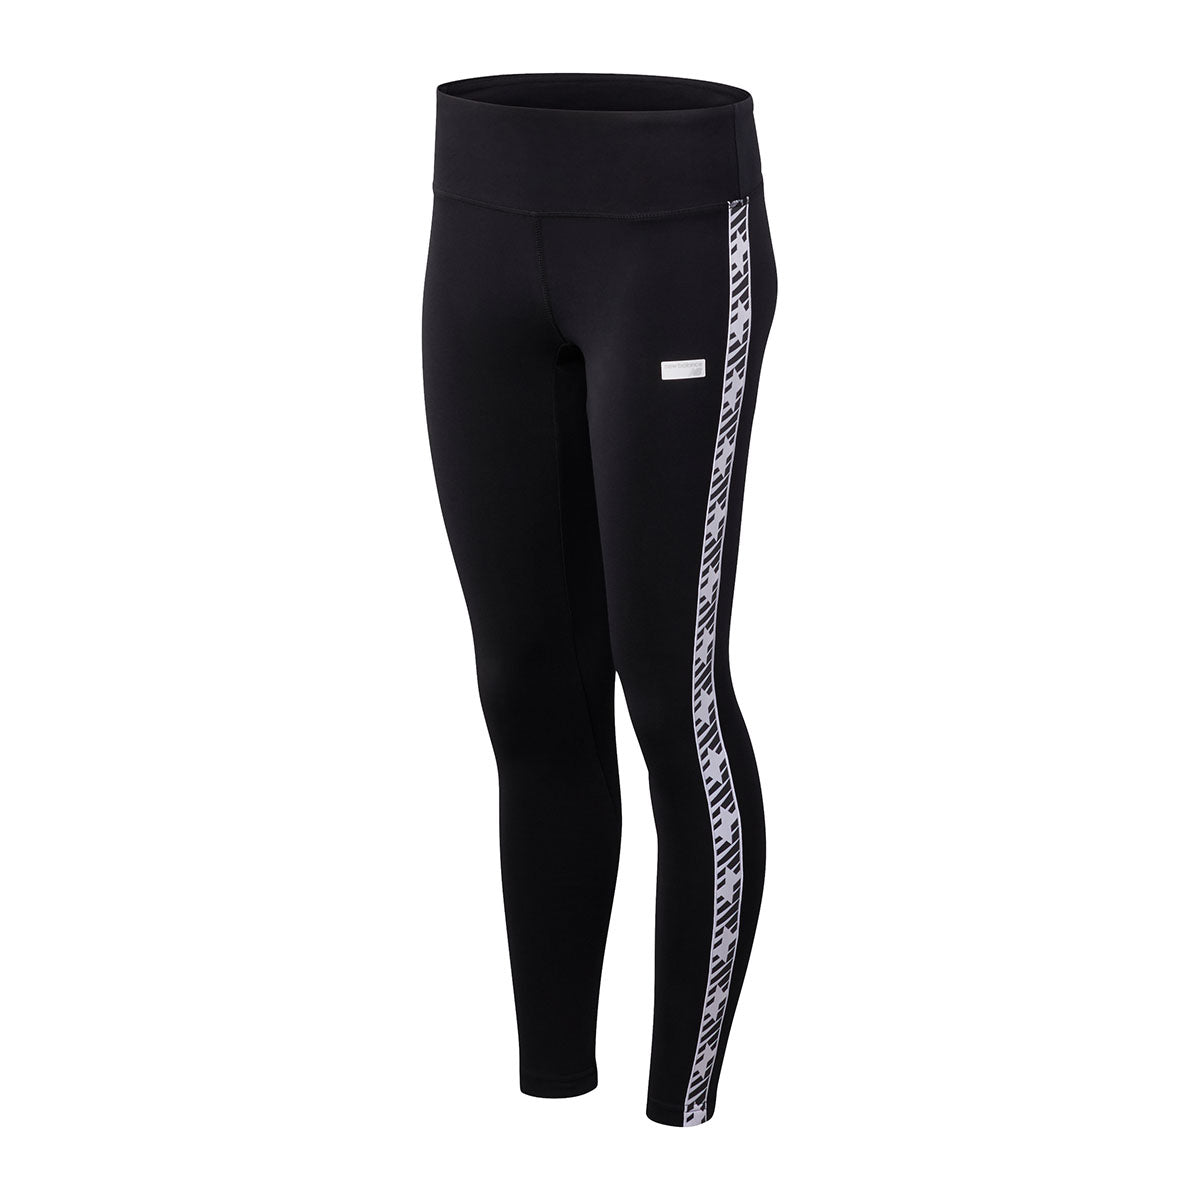 New Balance Athletics Piping Legging by New Balance of (187 color) for only  $45.00 - WP11506LWD